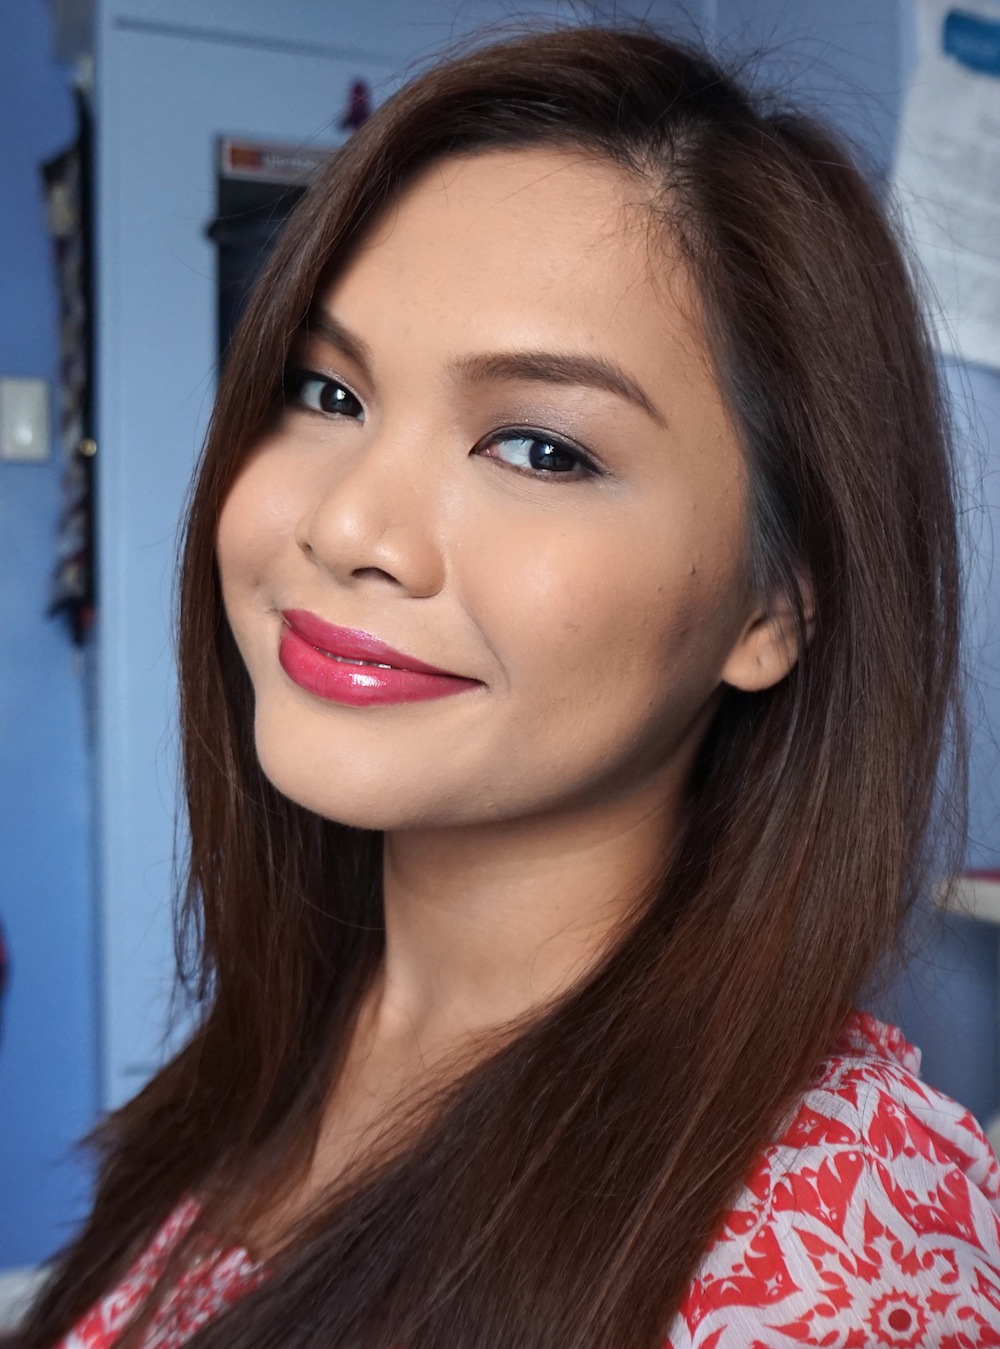 representative teenager And team Michael Kors Lip Luster in Siren Review + Swatch | The Beauty Junkee